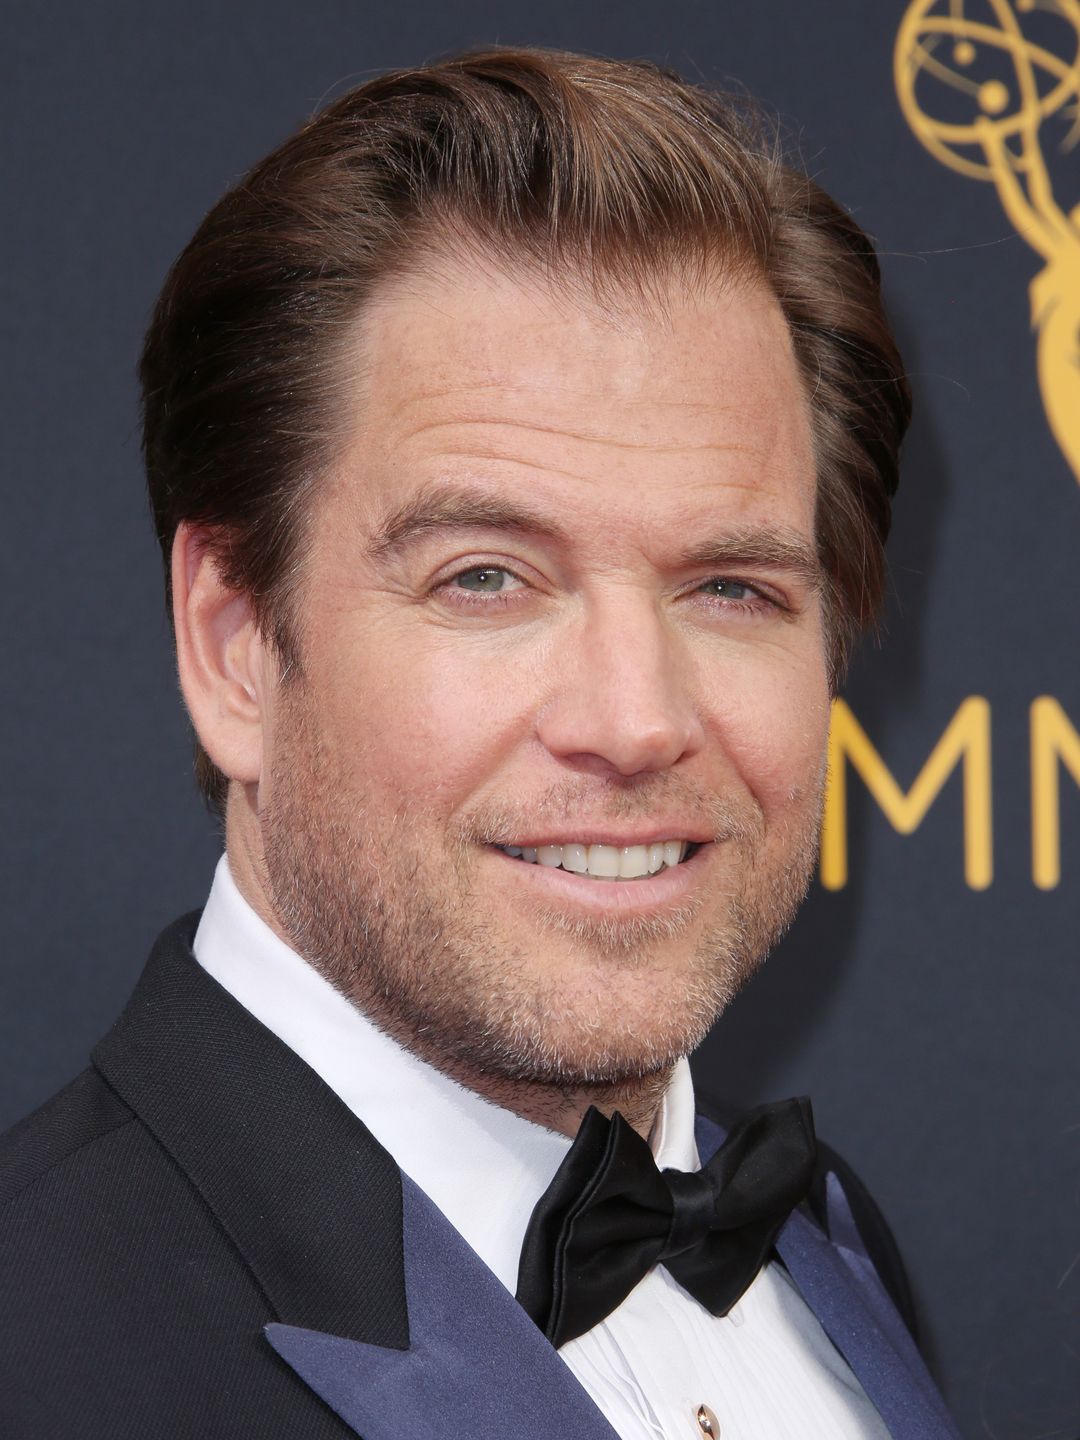 Michael Weatherly attending the Emmy Awards